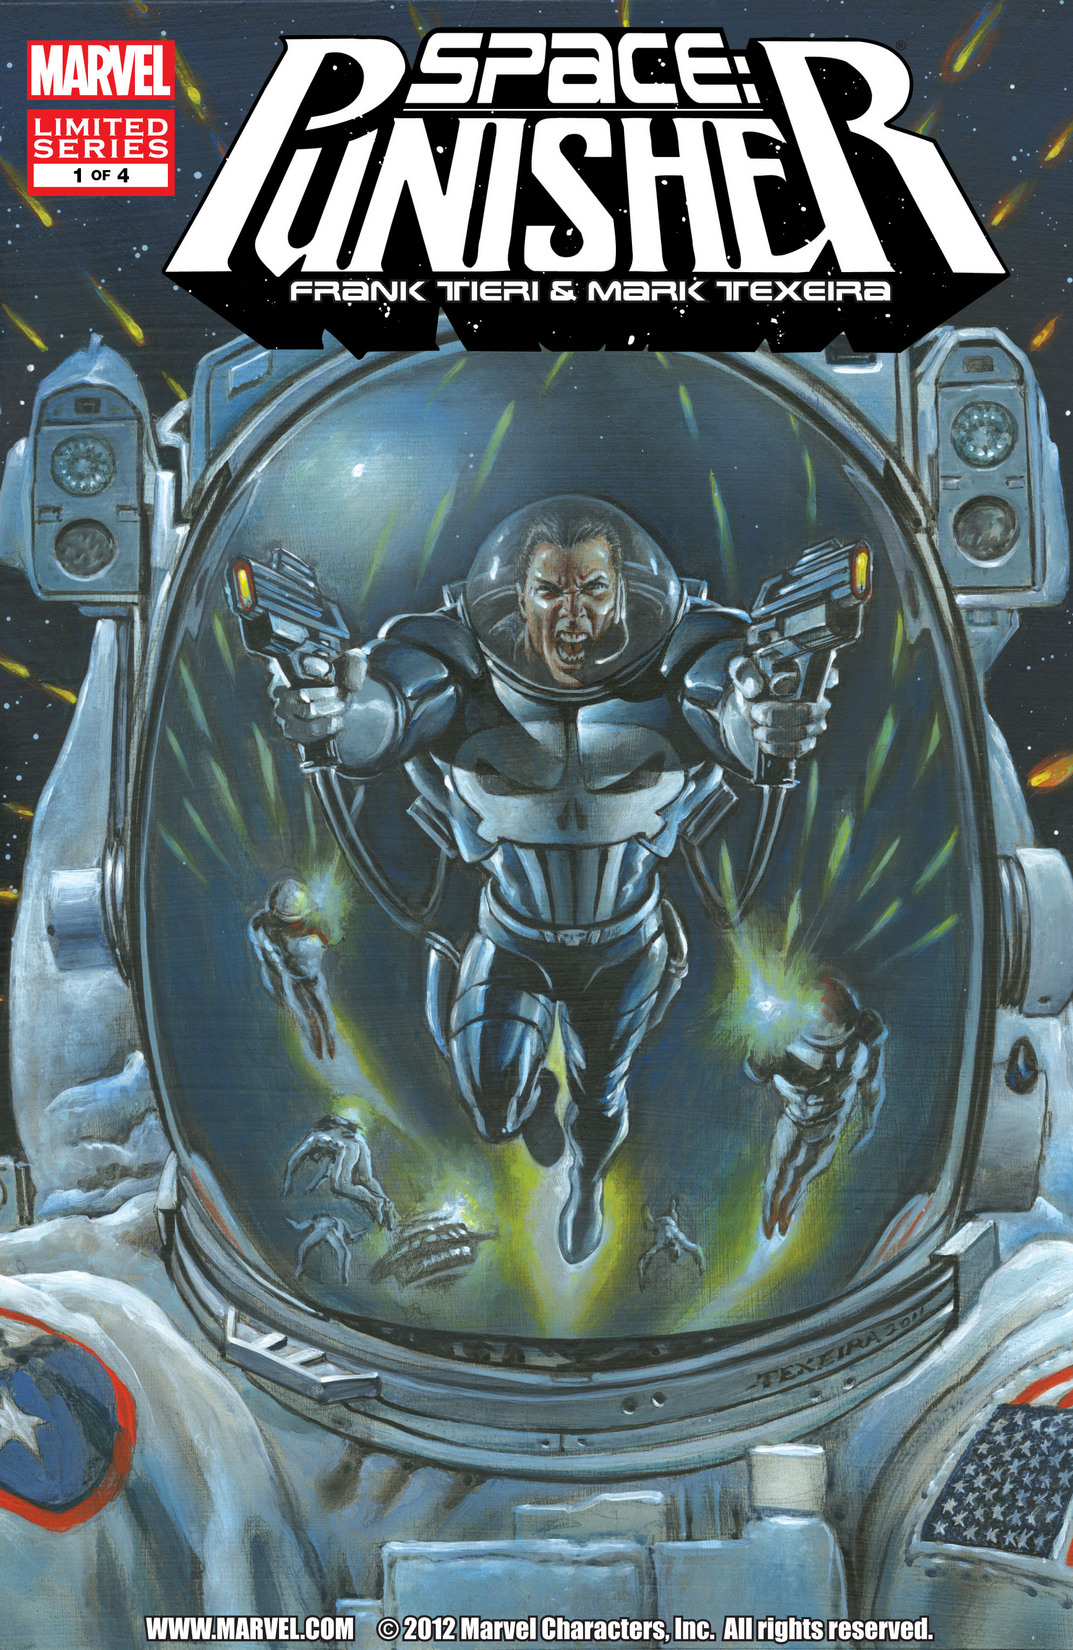 Read online Space: Punisher comic -  Issue #1 - 1